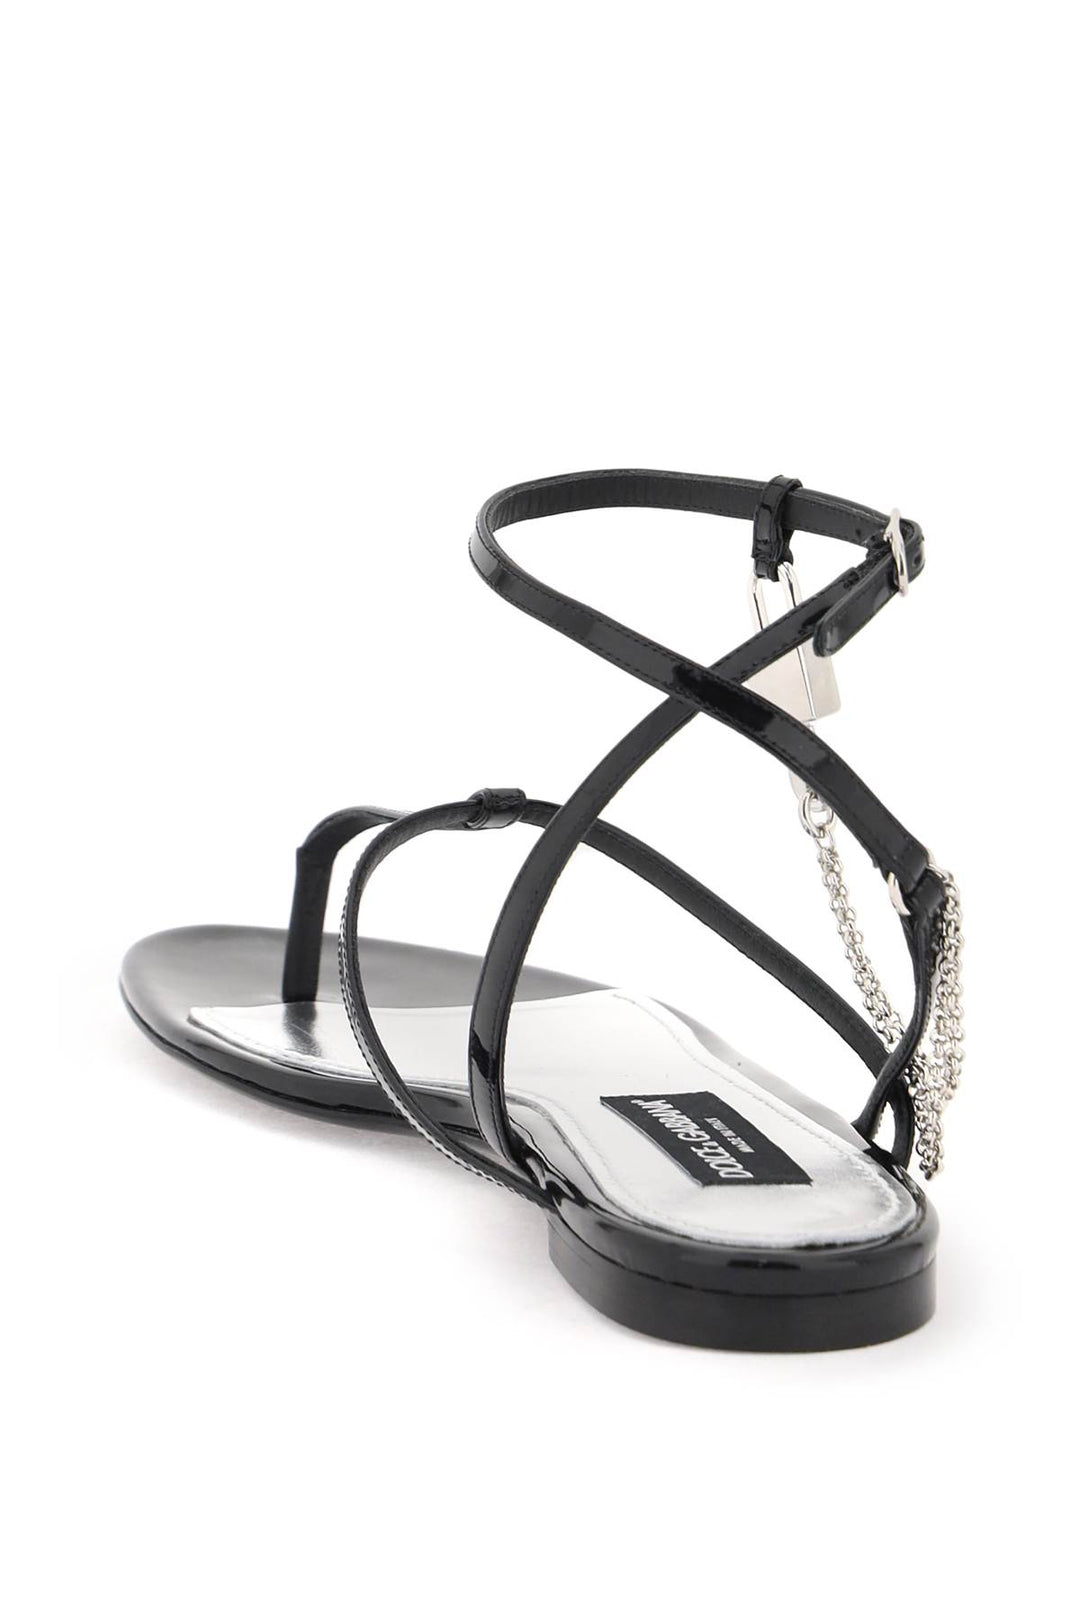 Dolce & gabbana patent leather thong sandals with padlock-2